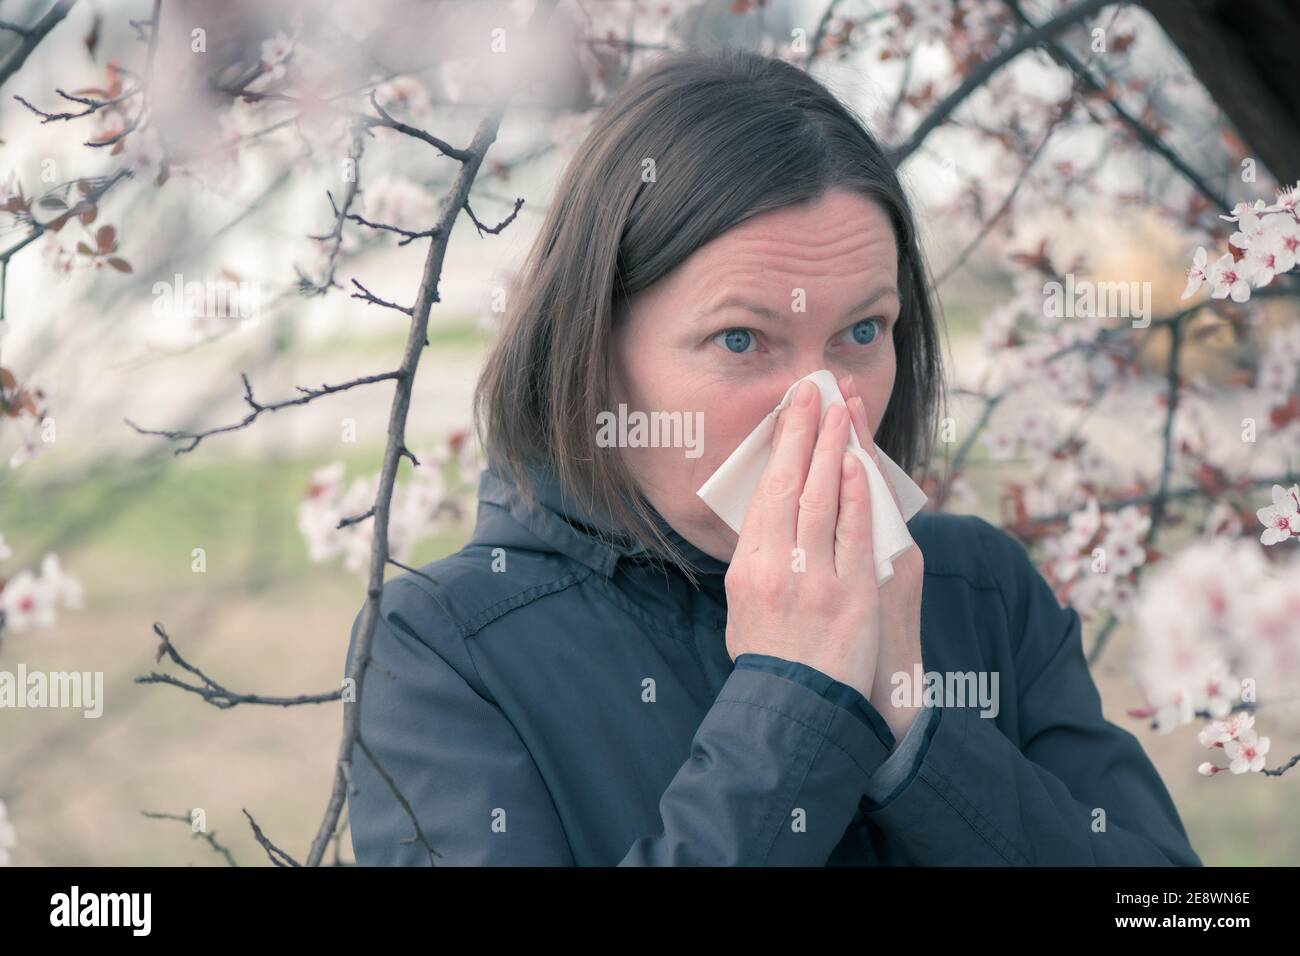 Woman sneezing in front of blooming cherry tree in spring allergy concept, selective focus Stock Photo